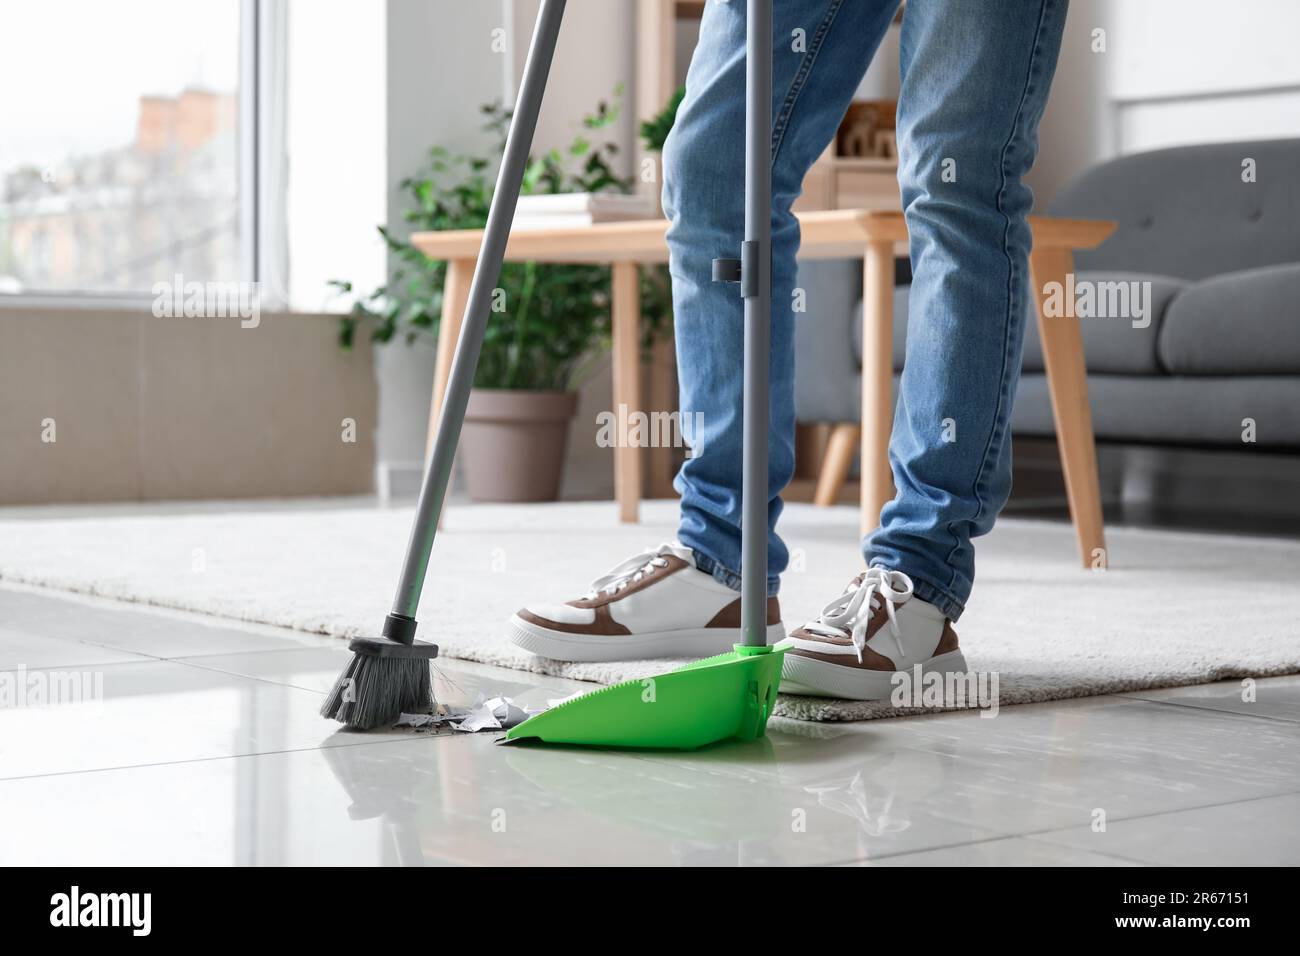 Young man sweeping floor with broom at home Stock Photo